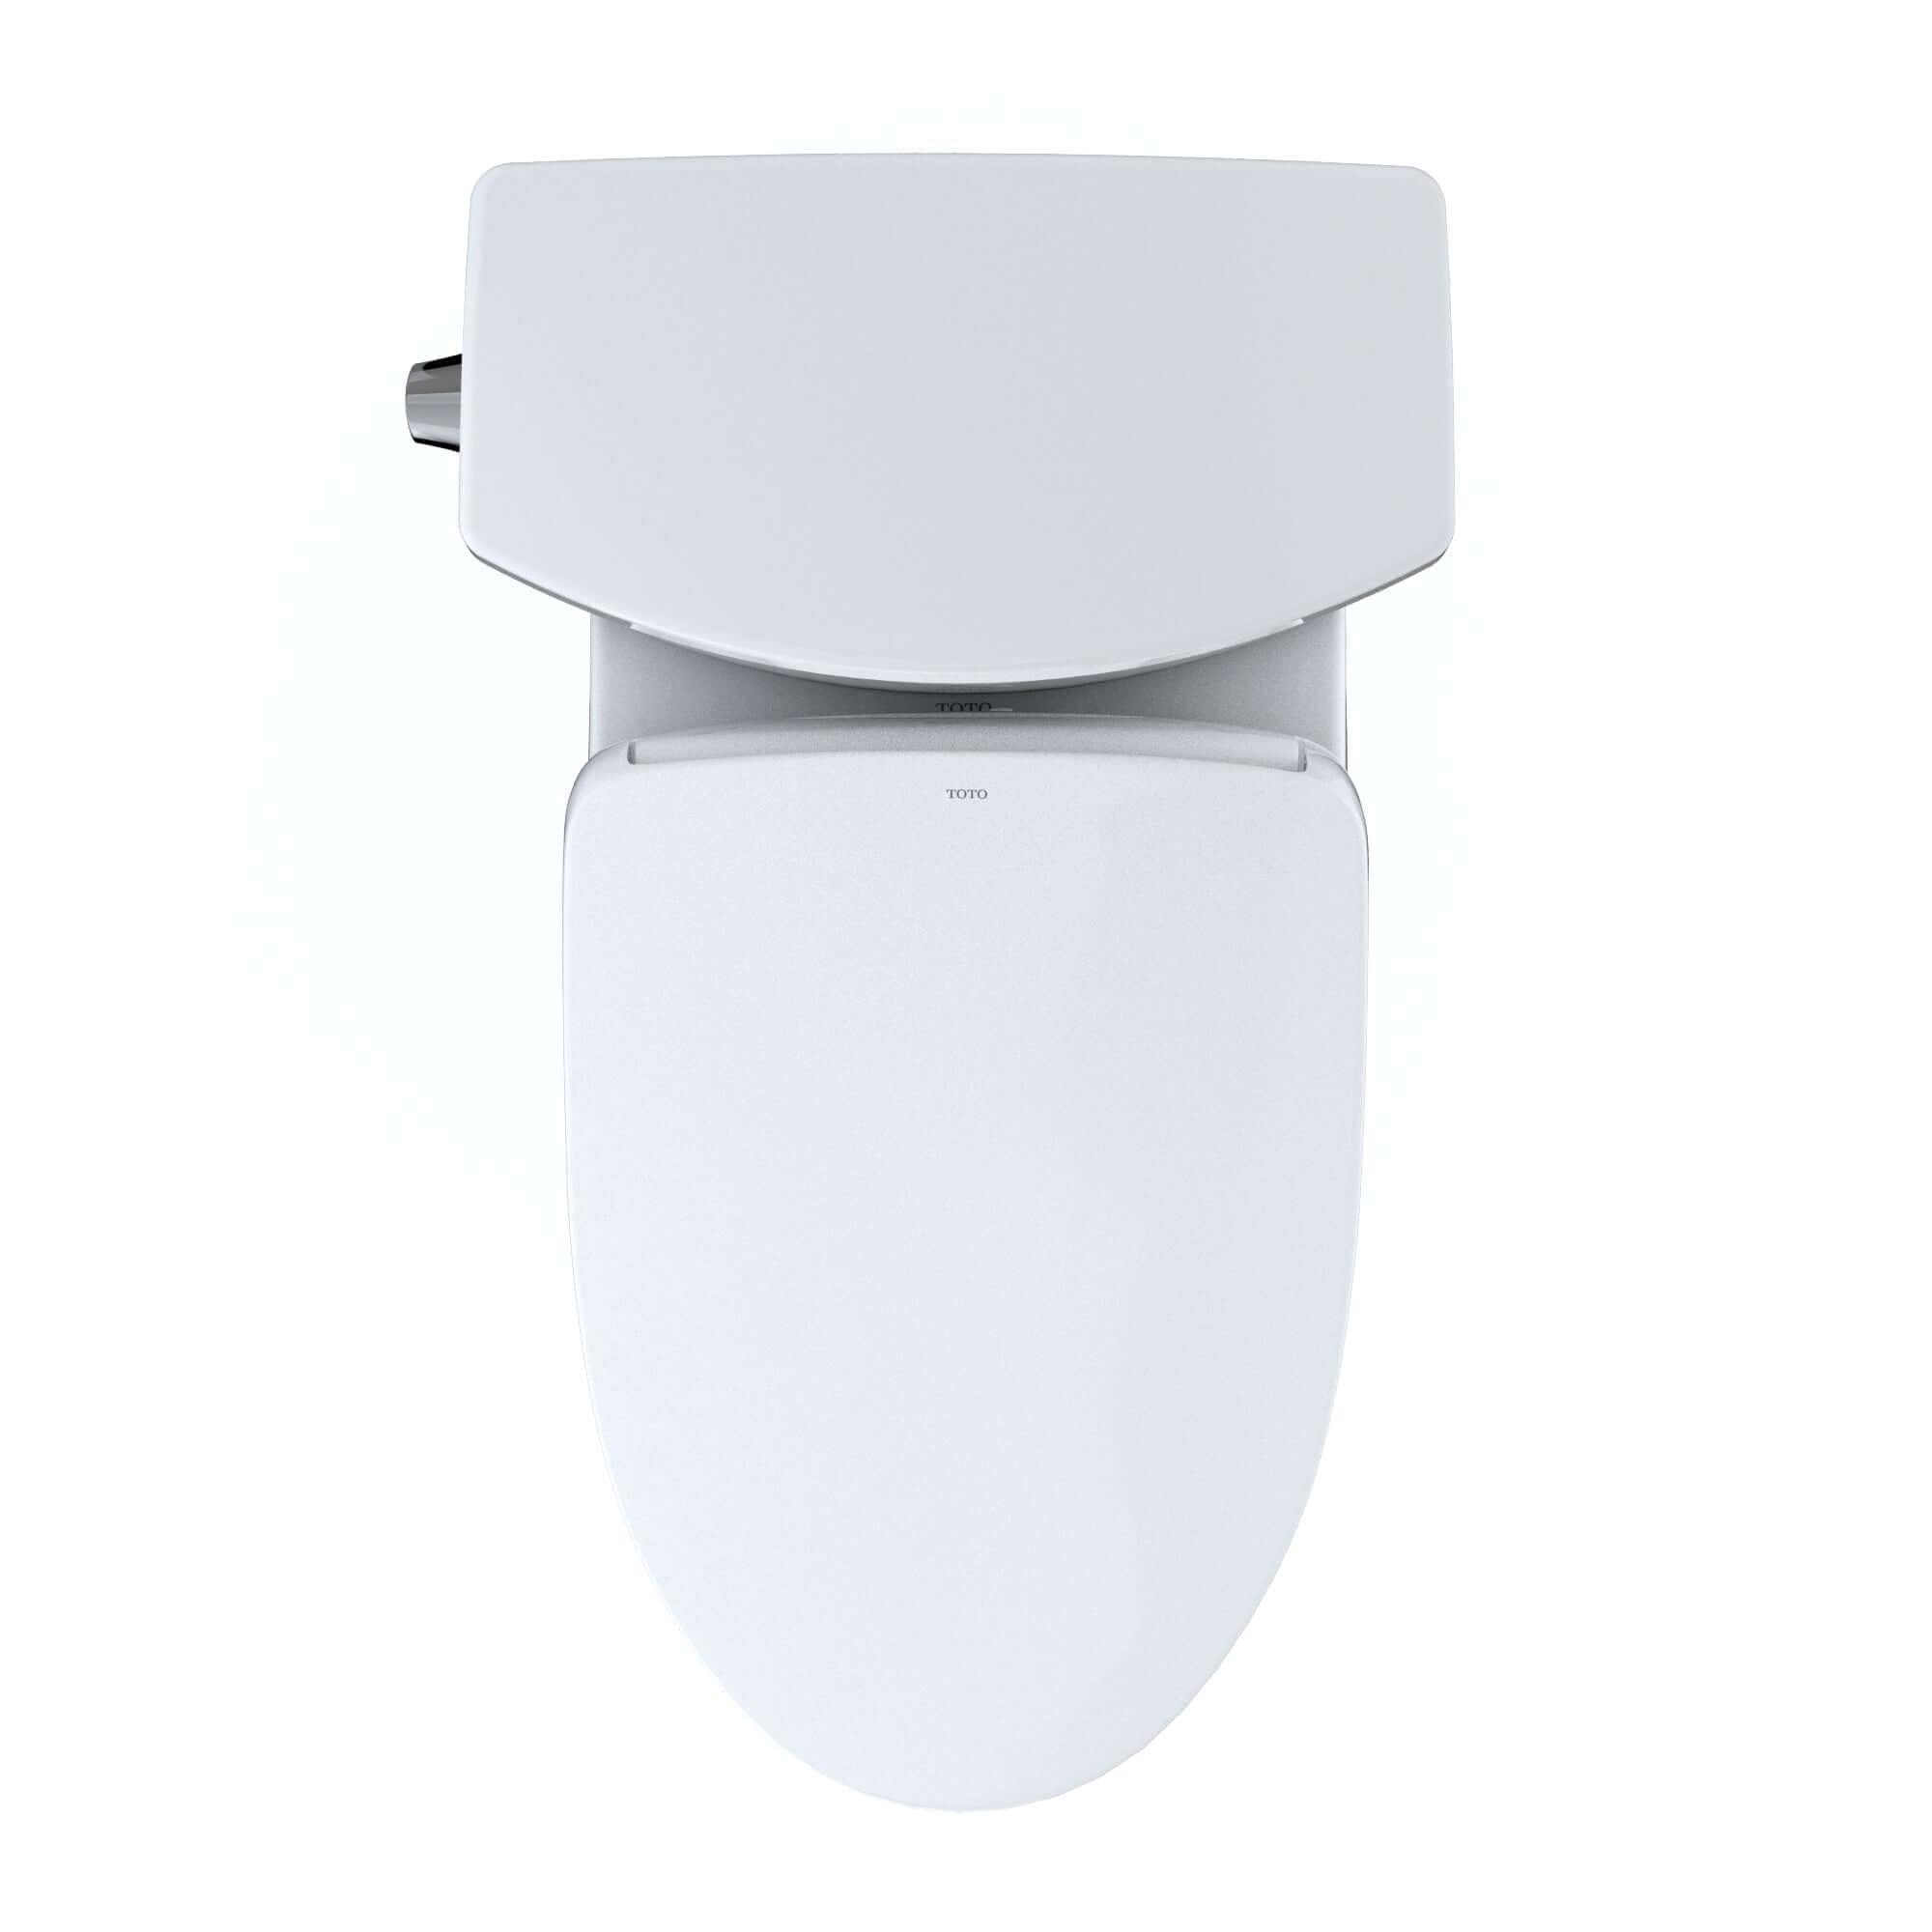 TOTO WASHLET+ Vespin II 1G Two-Piece Elongated 1.0 GPF Toilet and WASHLET+ S500e Contemporary Bidet Seat, Cotton White - MW4743046CUFG(A)#01